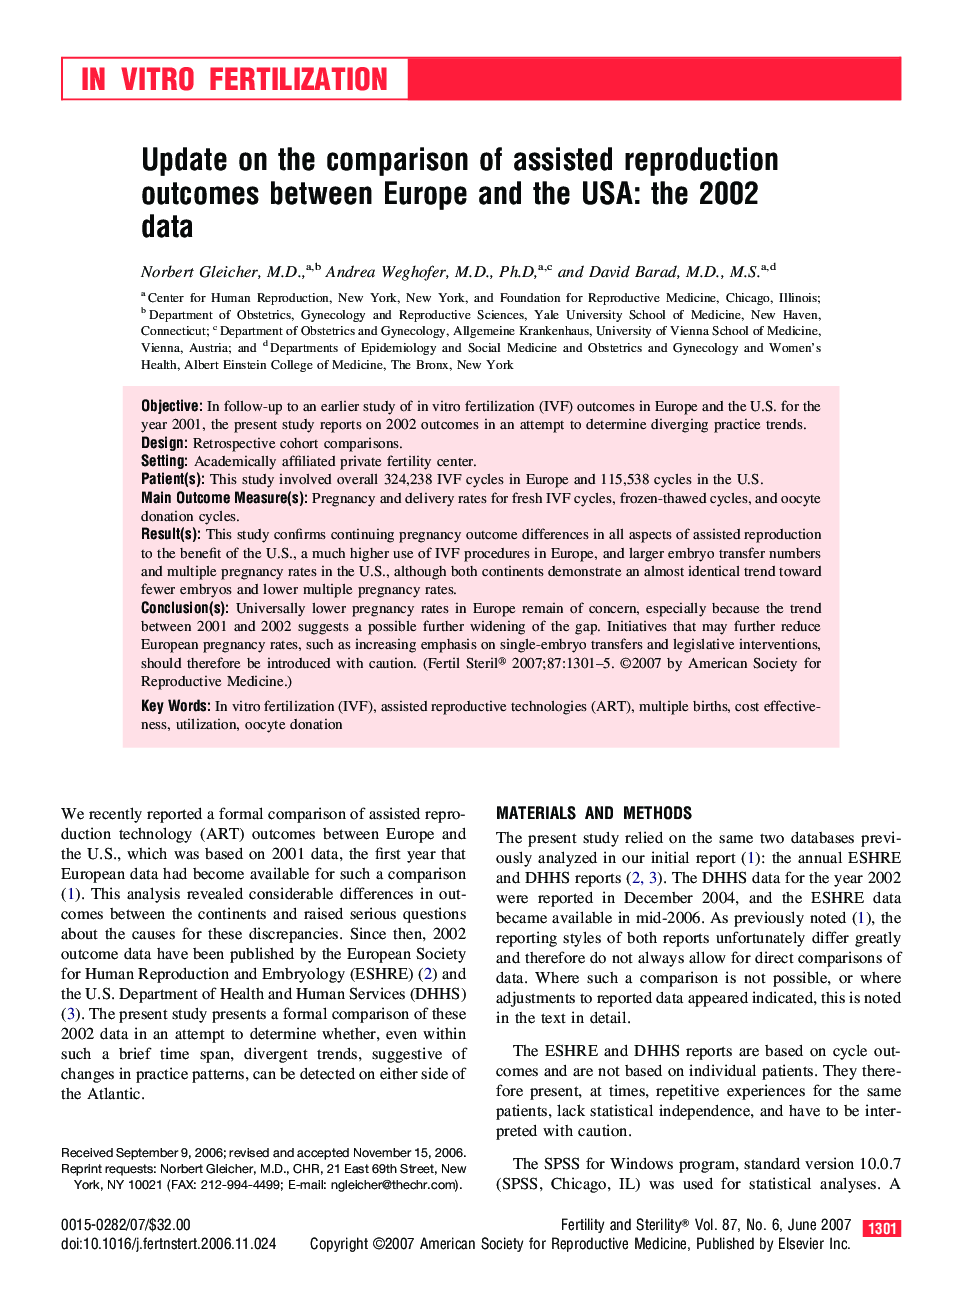 Update on the comparison of assisted reproduction outcomes between Europe and the USA: the 2002 data